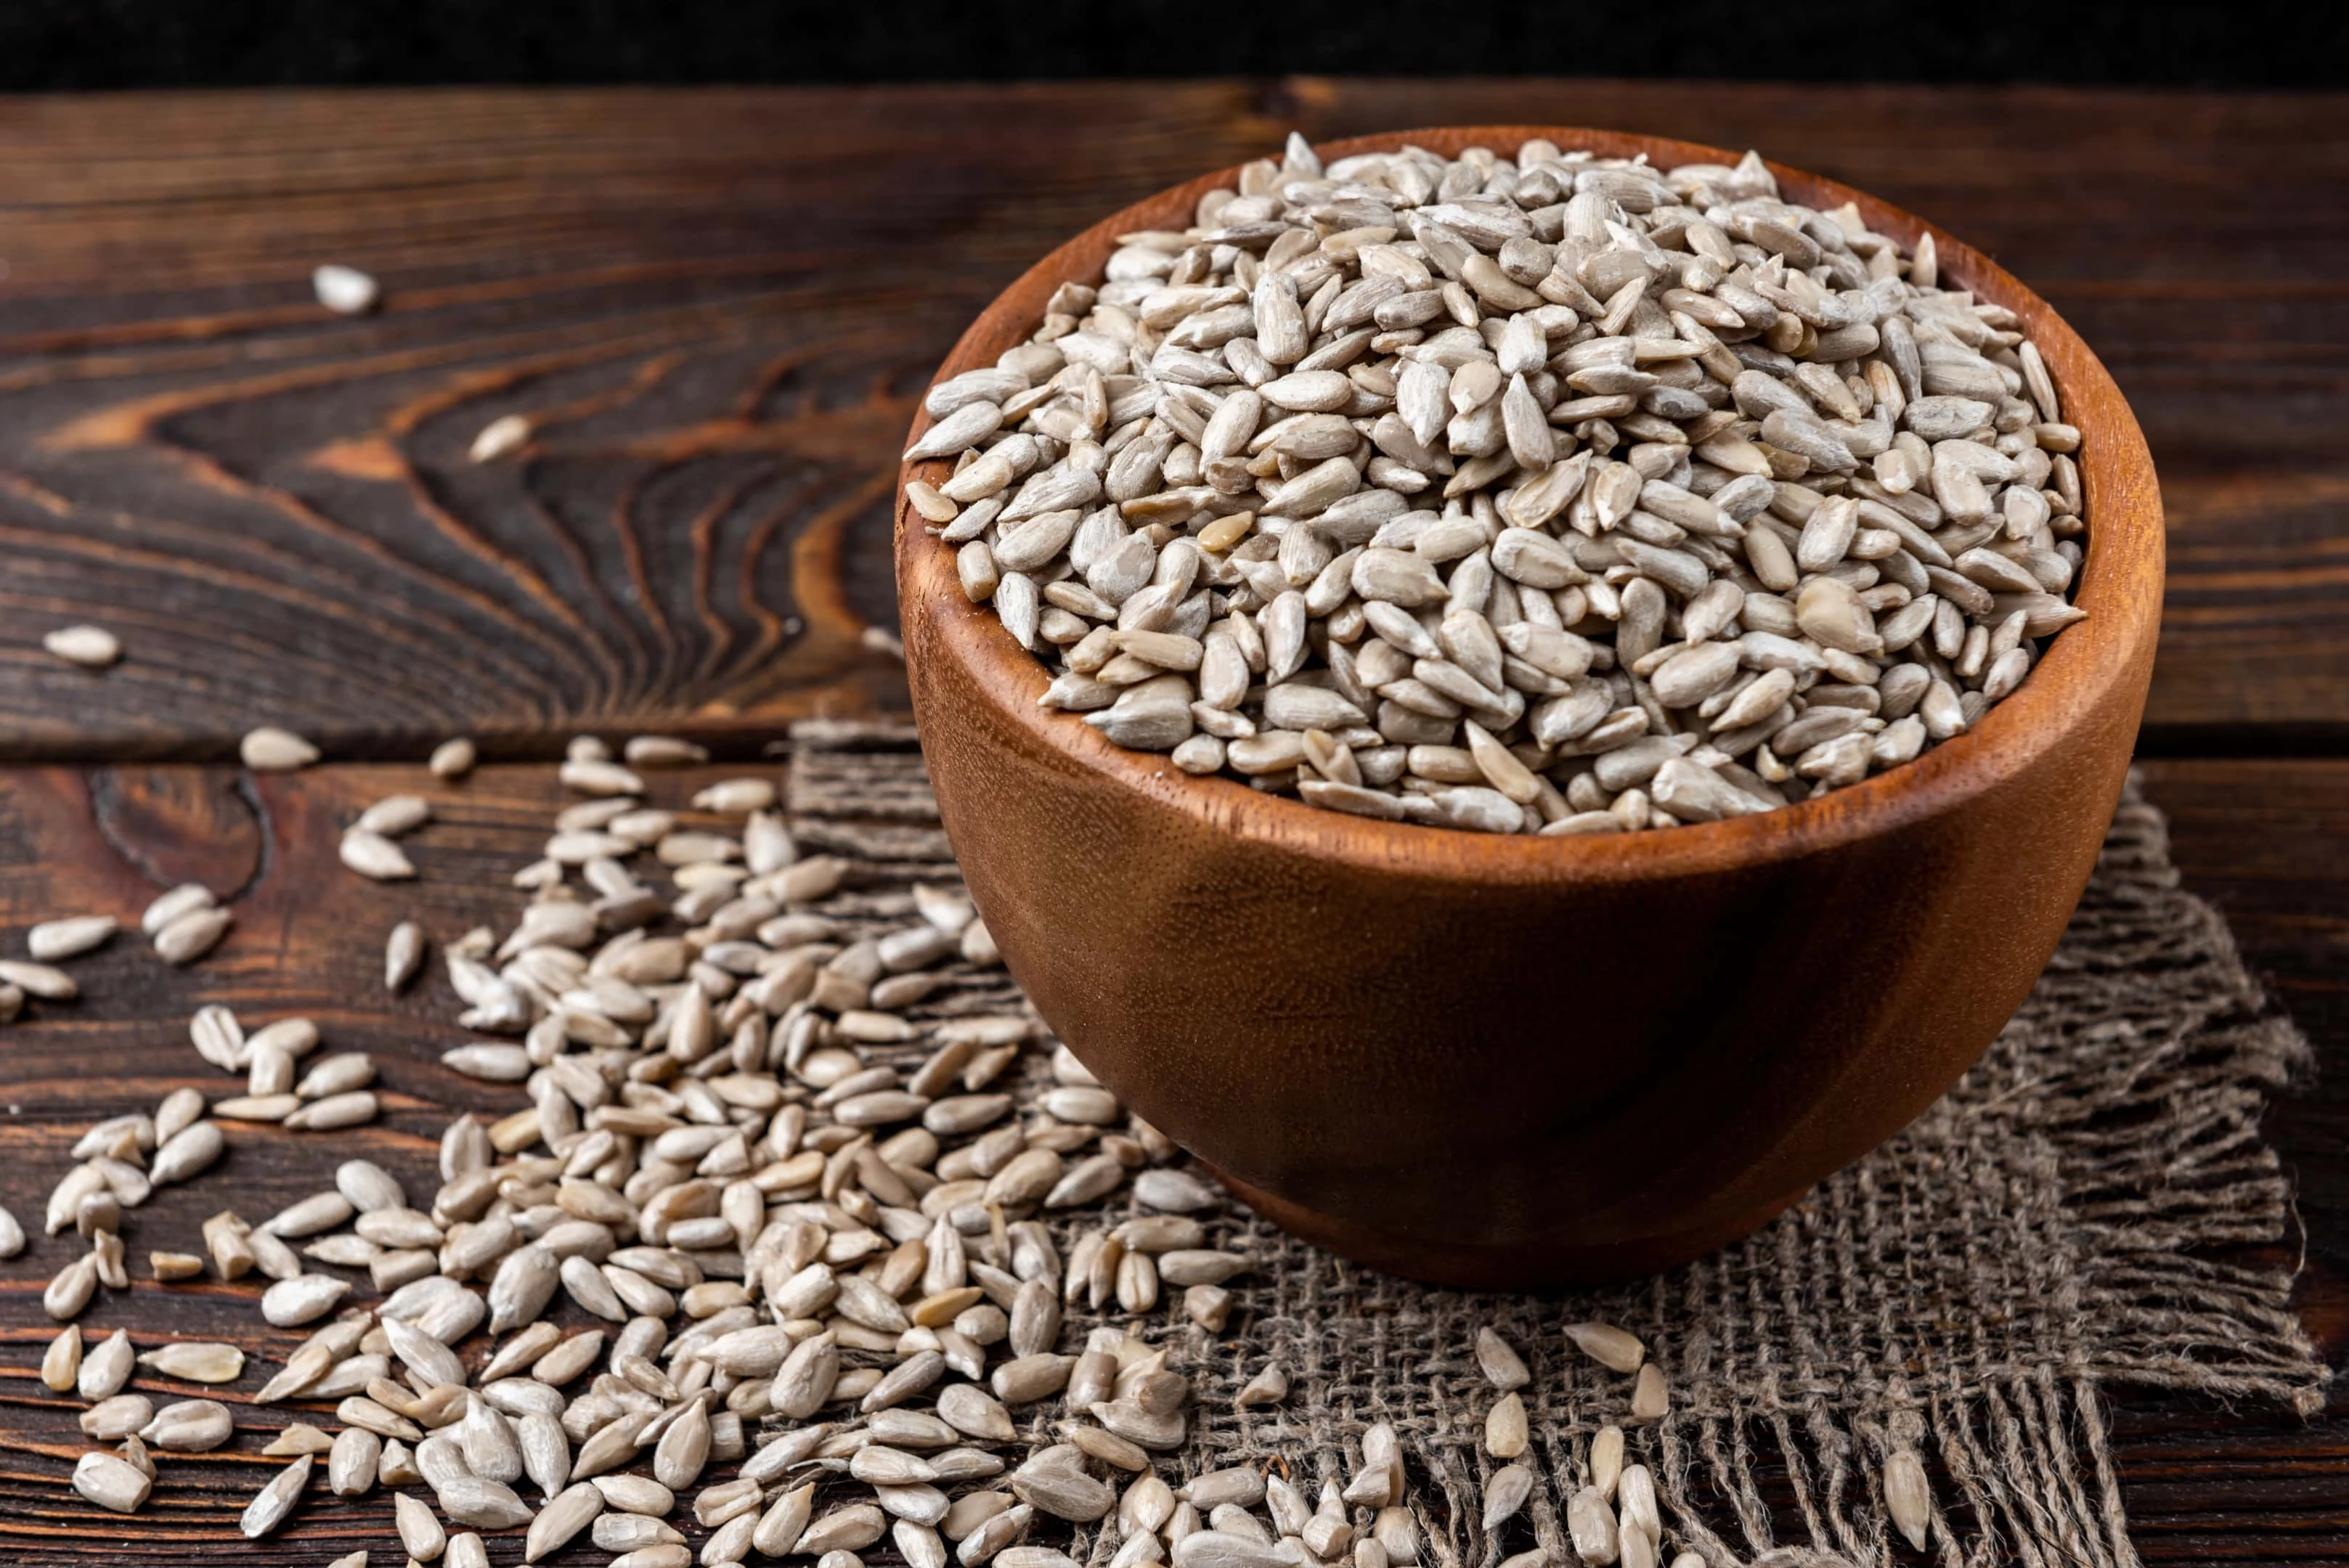 Sunflower seeds in wooden bowl on wooden table